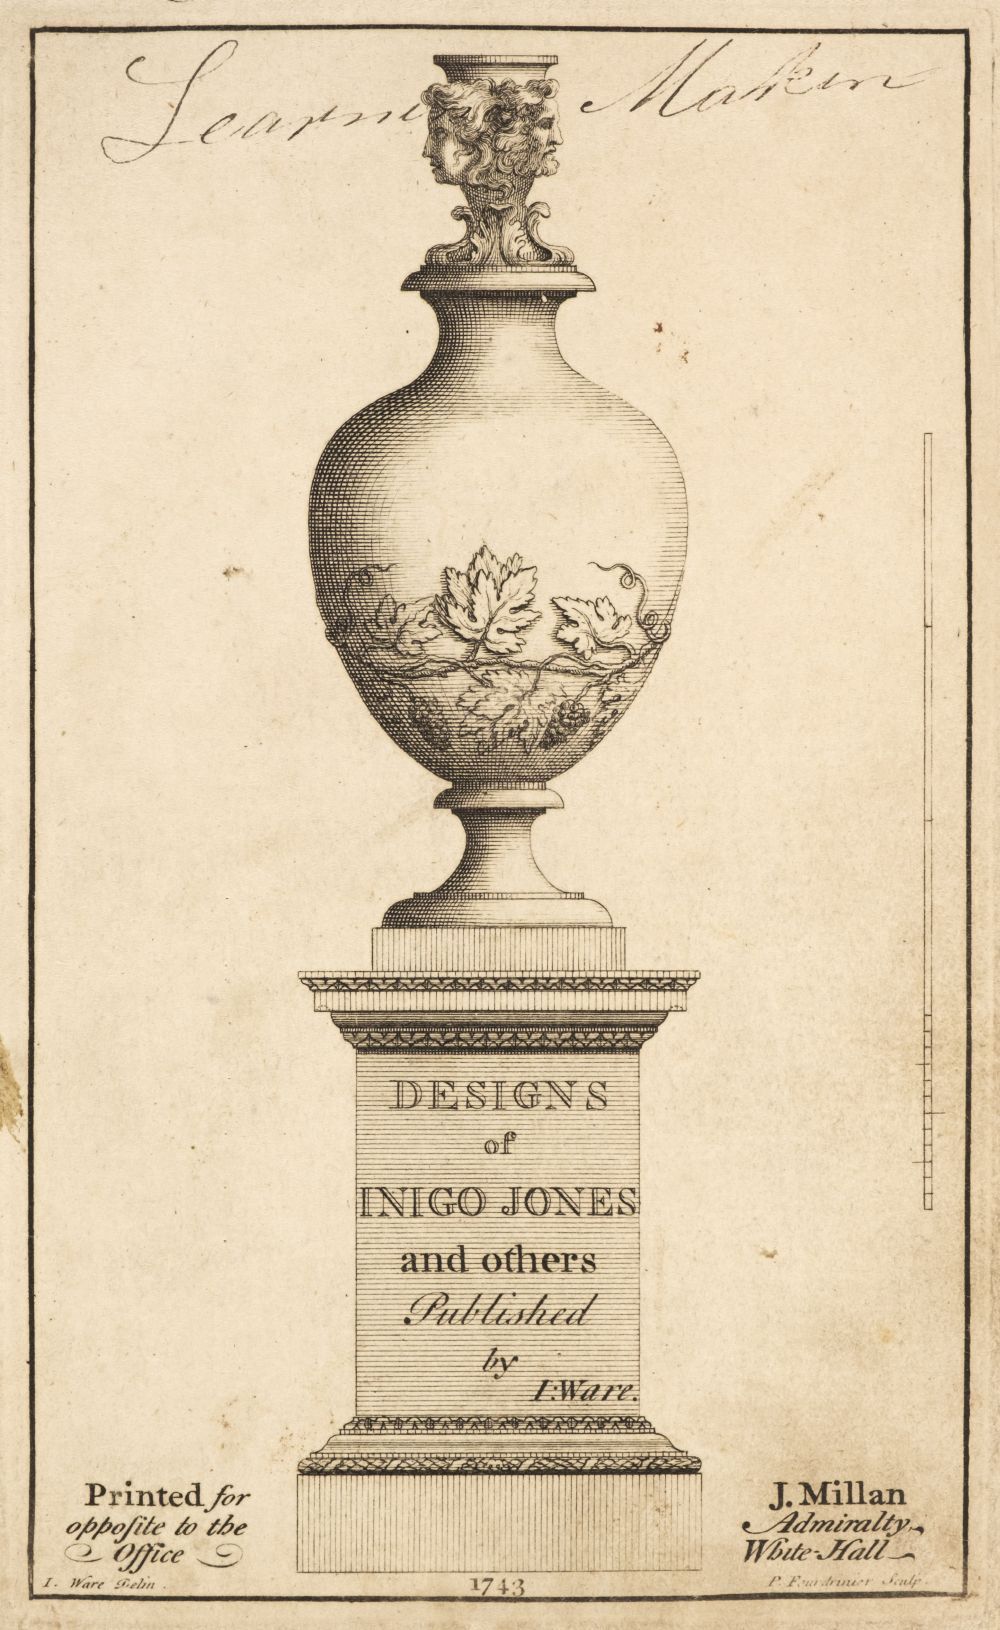 Ware (Isaac). Designs of Inigo Jones and Others, published by I. Ware, 1743